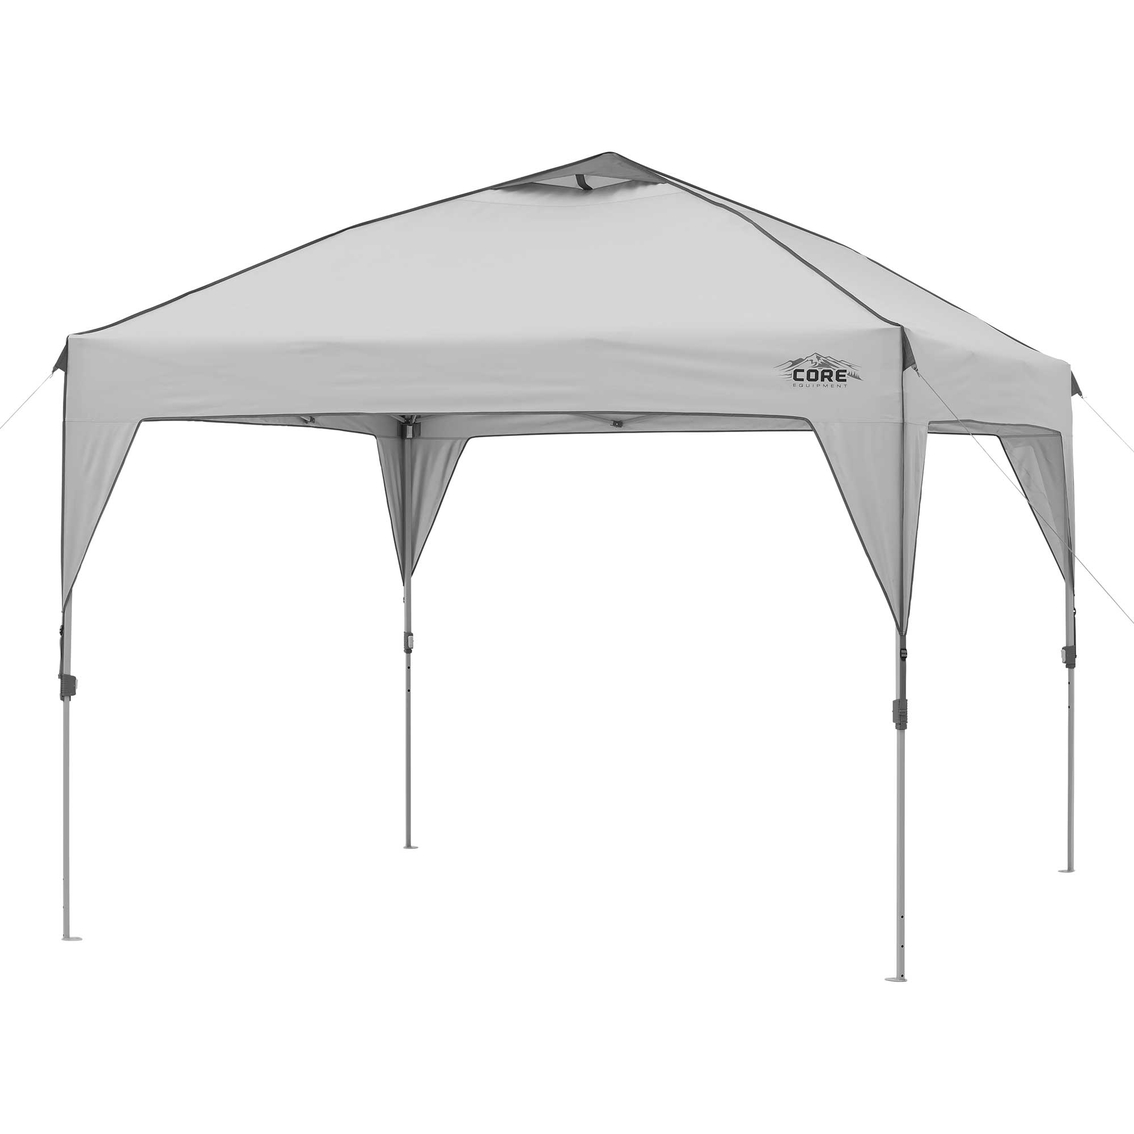 Core Equipment 10 x 10 ft. Instant Canopy